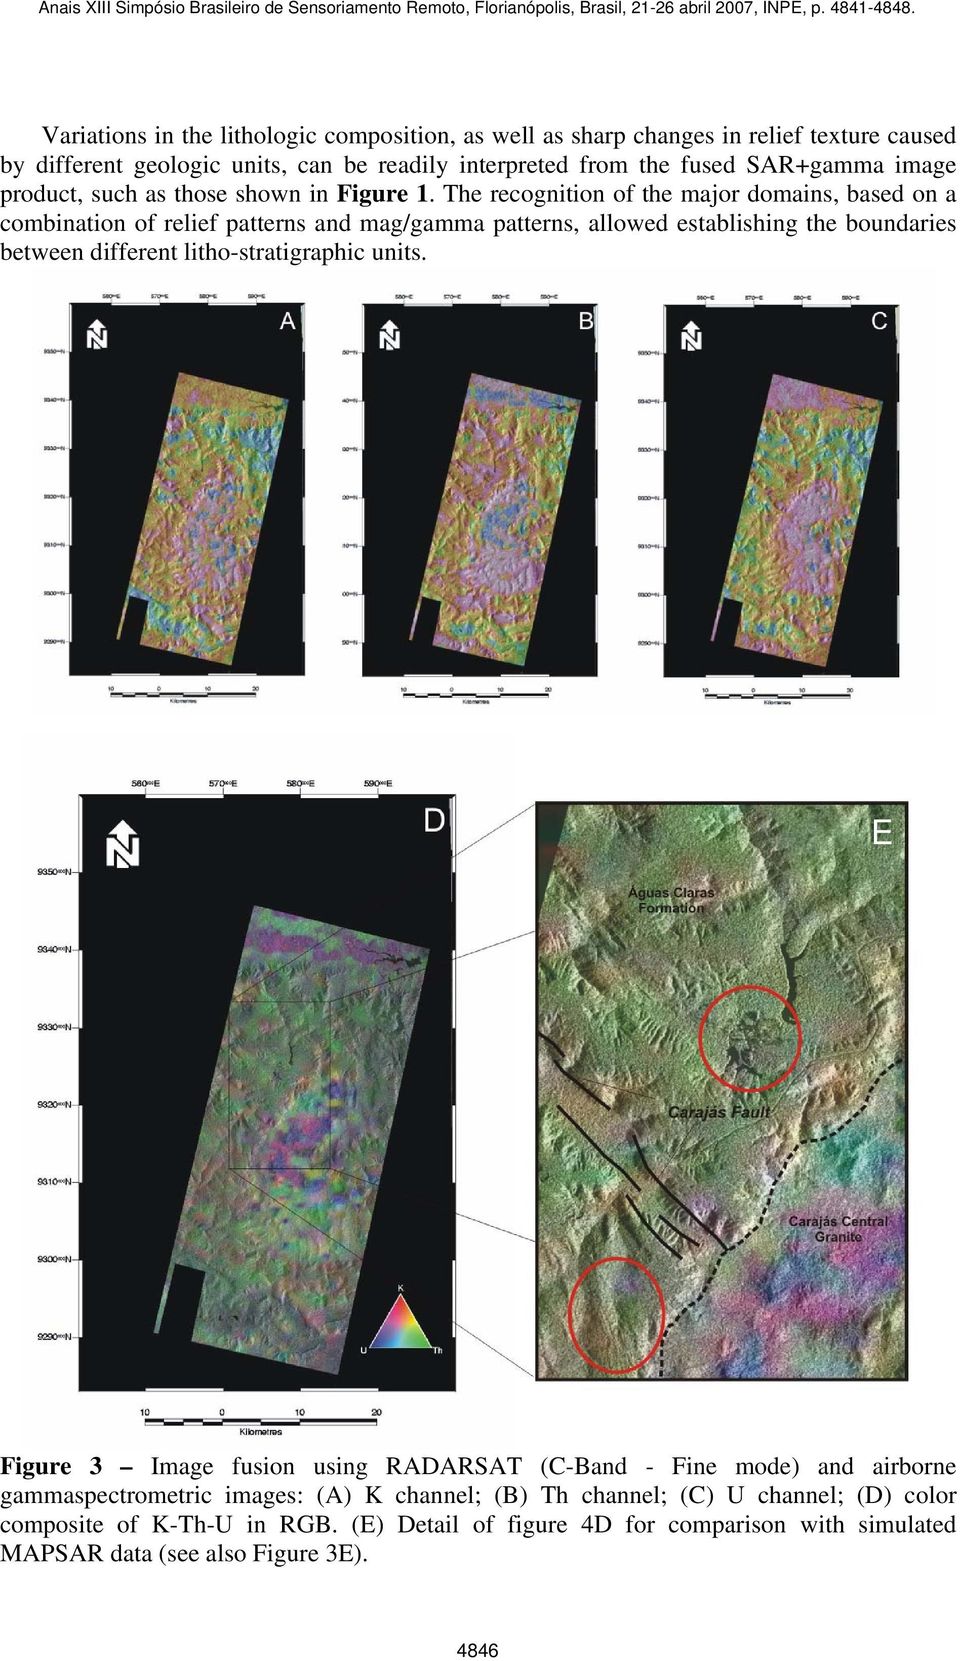 The recognition of the major domains, based on a combination of relief patterns and mag/gamma patterns, allowed establishing the boundaries between different